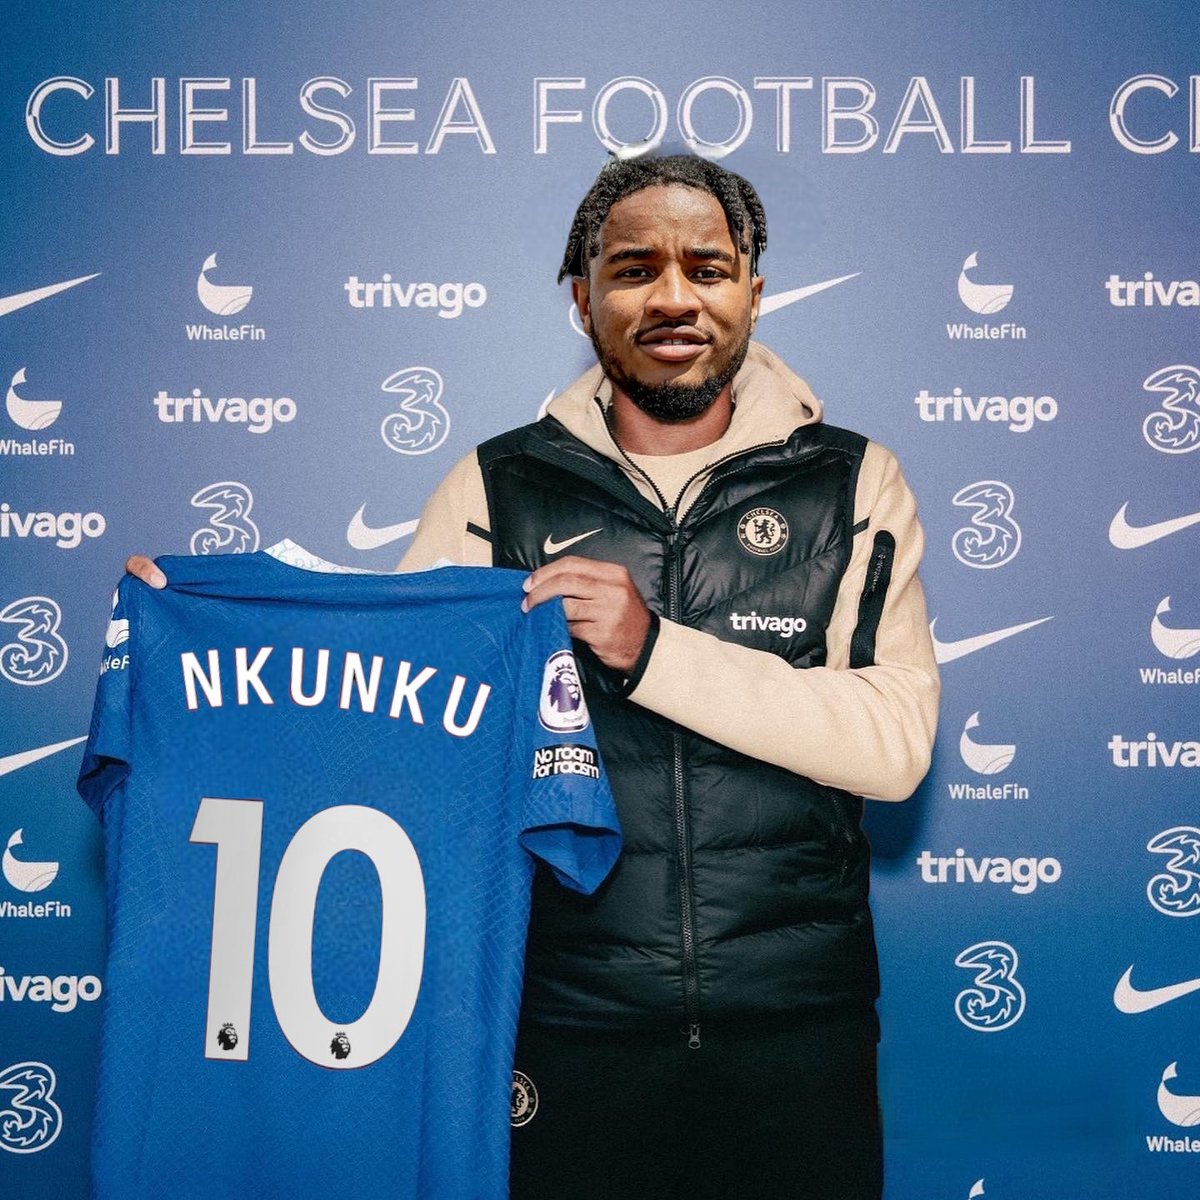 Christopher Nkunku, 25 years old, in his prime, 104 Goals & Assists in 4 Seasons.

Chelsea are signing a World-Class Attacker. Our new Number 10 will cook under Pochettino.

No Bundesliga Tax with Nkunku, he's Elite, Different Class.

Welcome to Chelsea, Christopher Nkunku🎈🔵